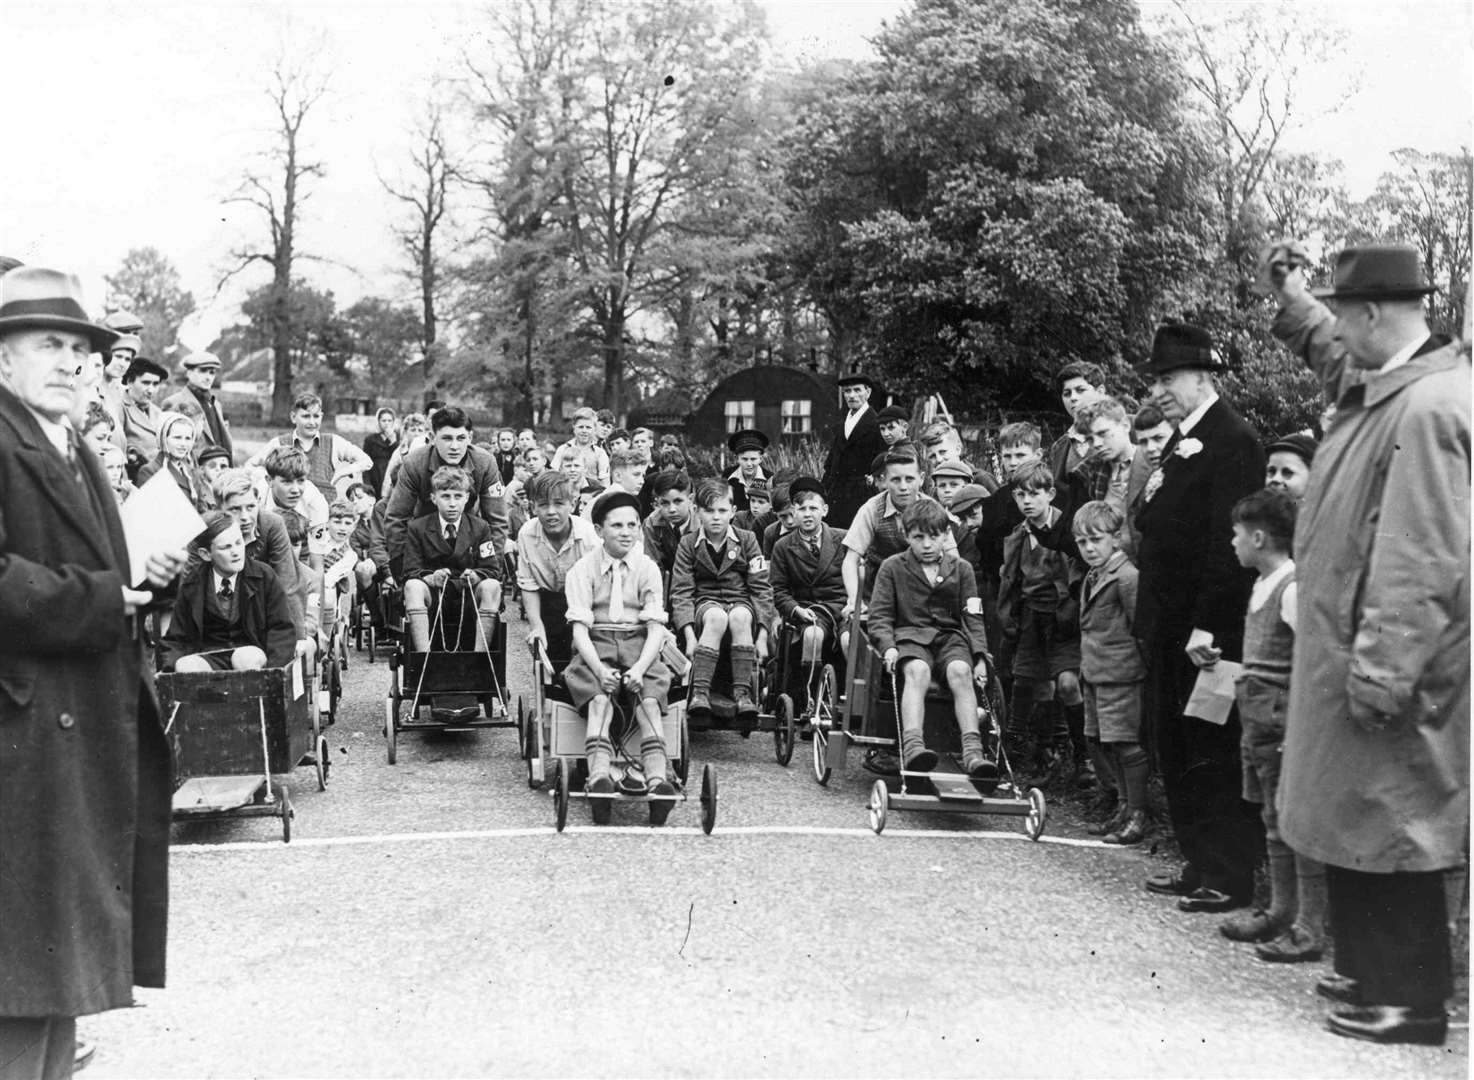 In the days when life's pleasures were decidedly more simple than today, children enjoyed making soap box carts. Pictured is the Mote Park soap box derby in 1950, with the Mayor Alderman W. Day doing the honours